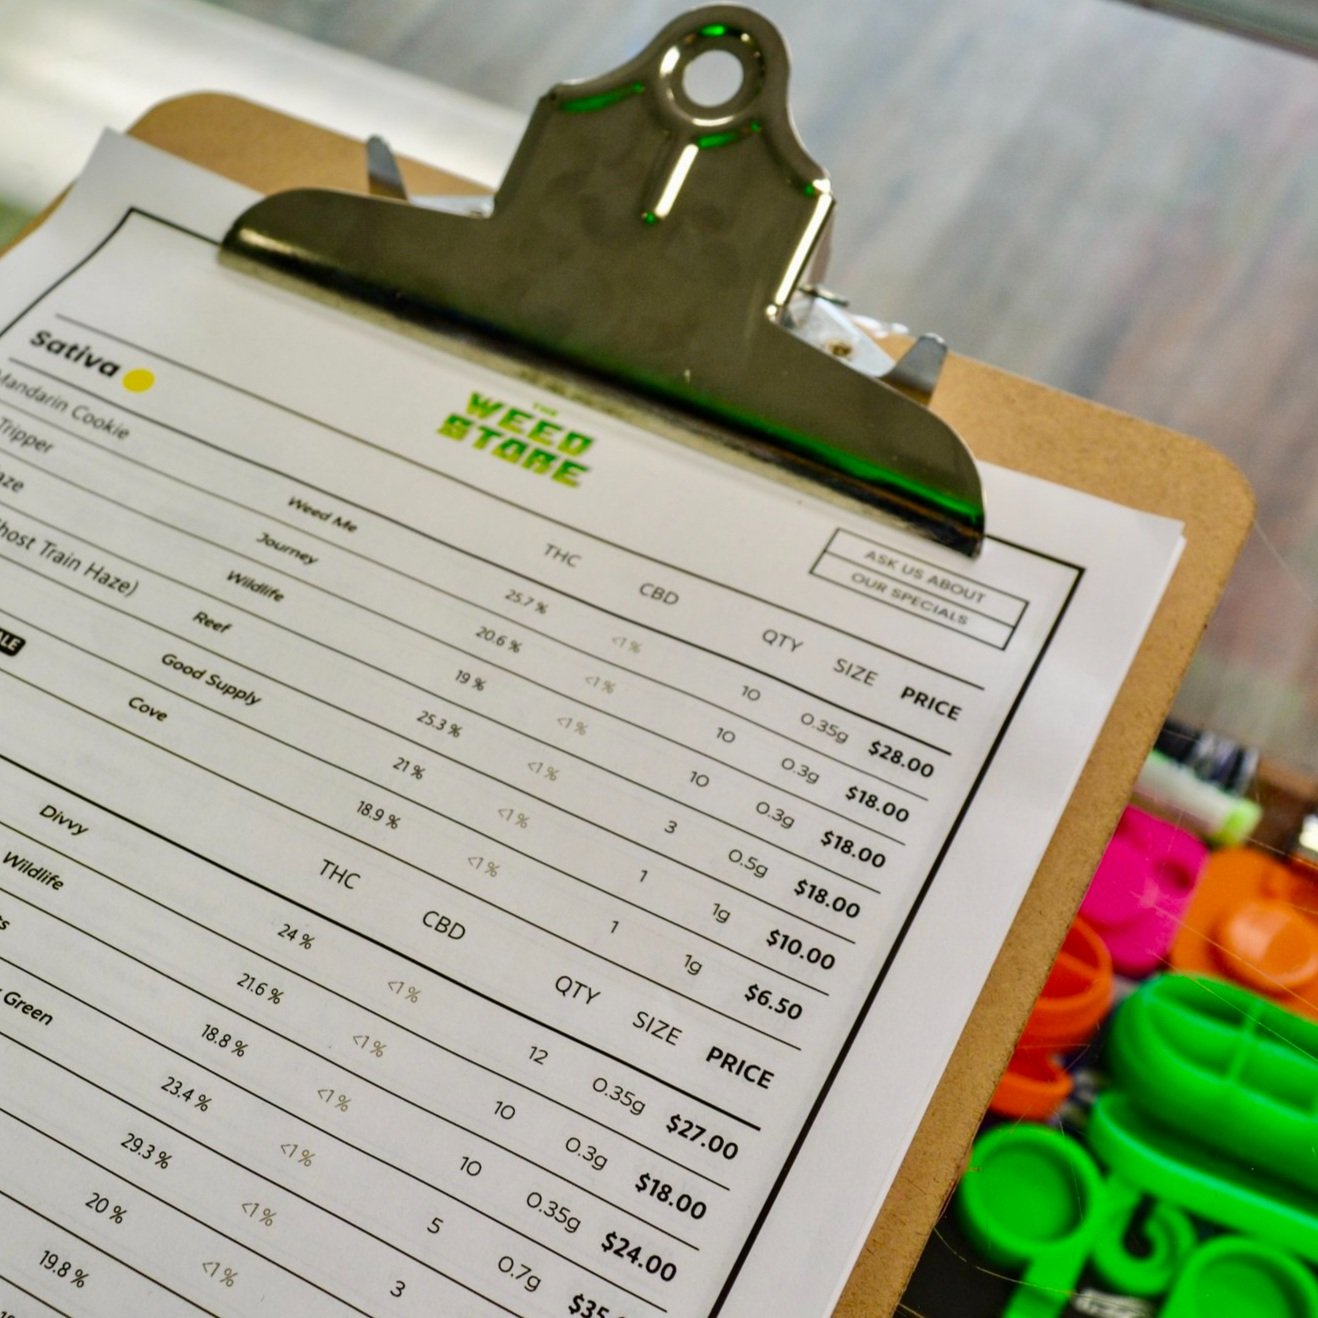 The Weed Store - Paper Menu - Clipboard on Counter.jpg